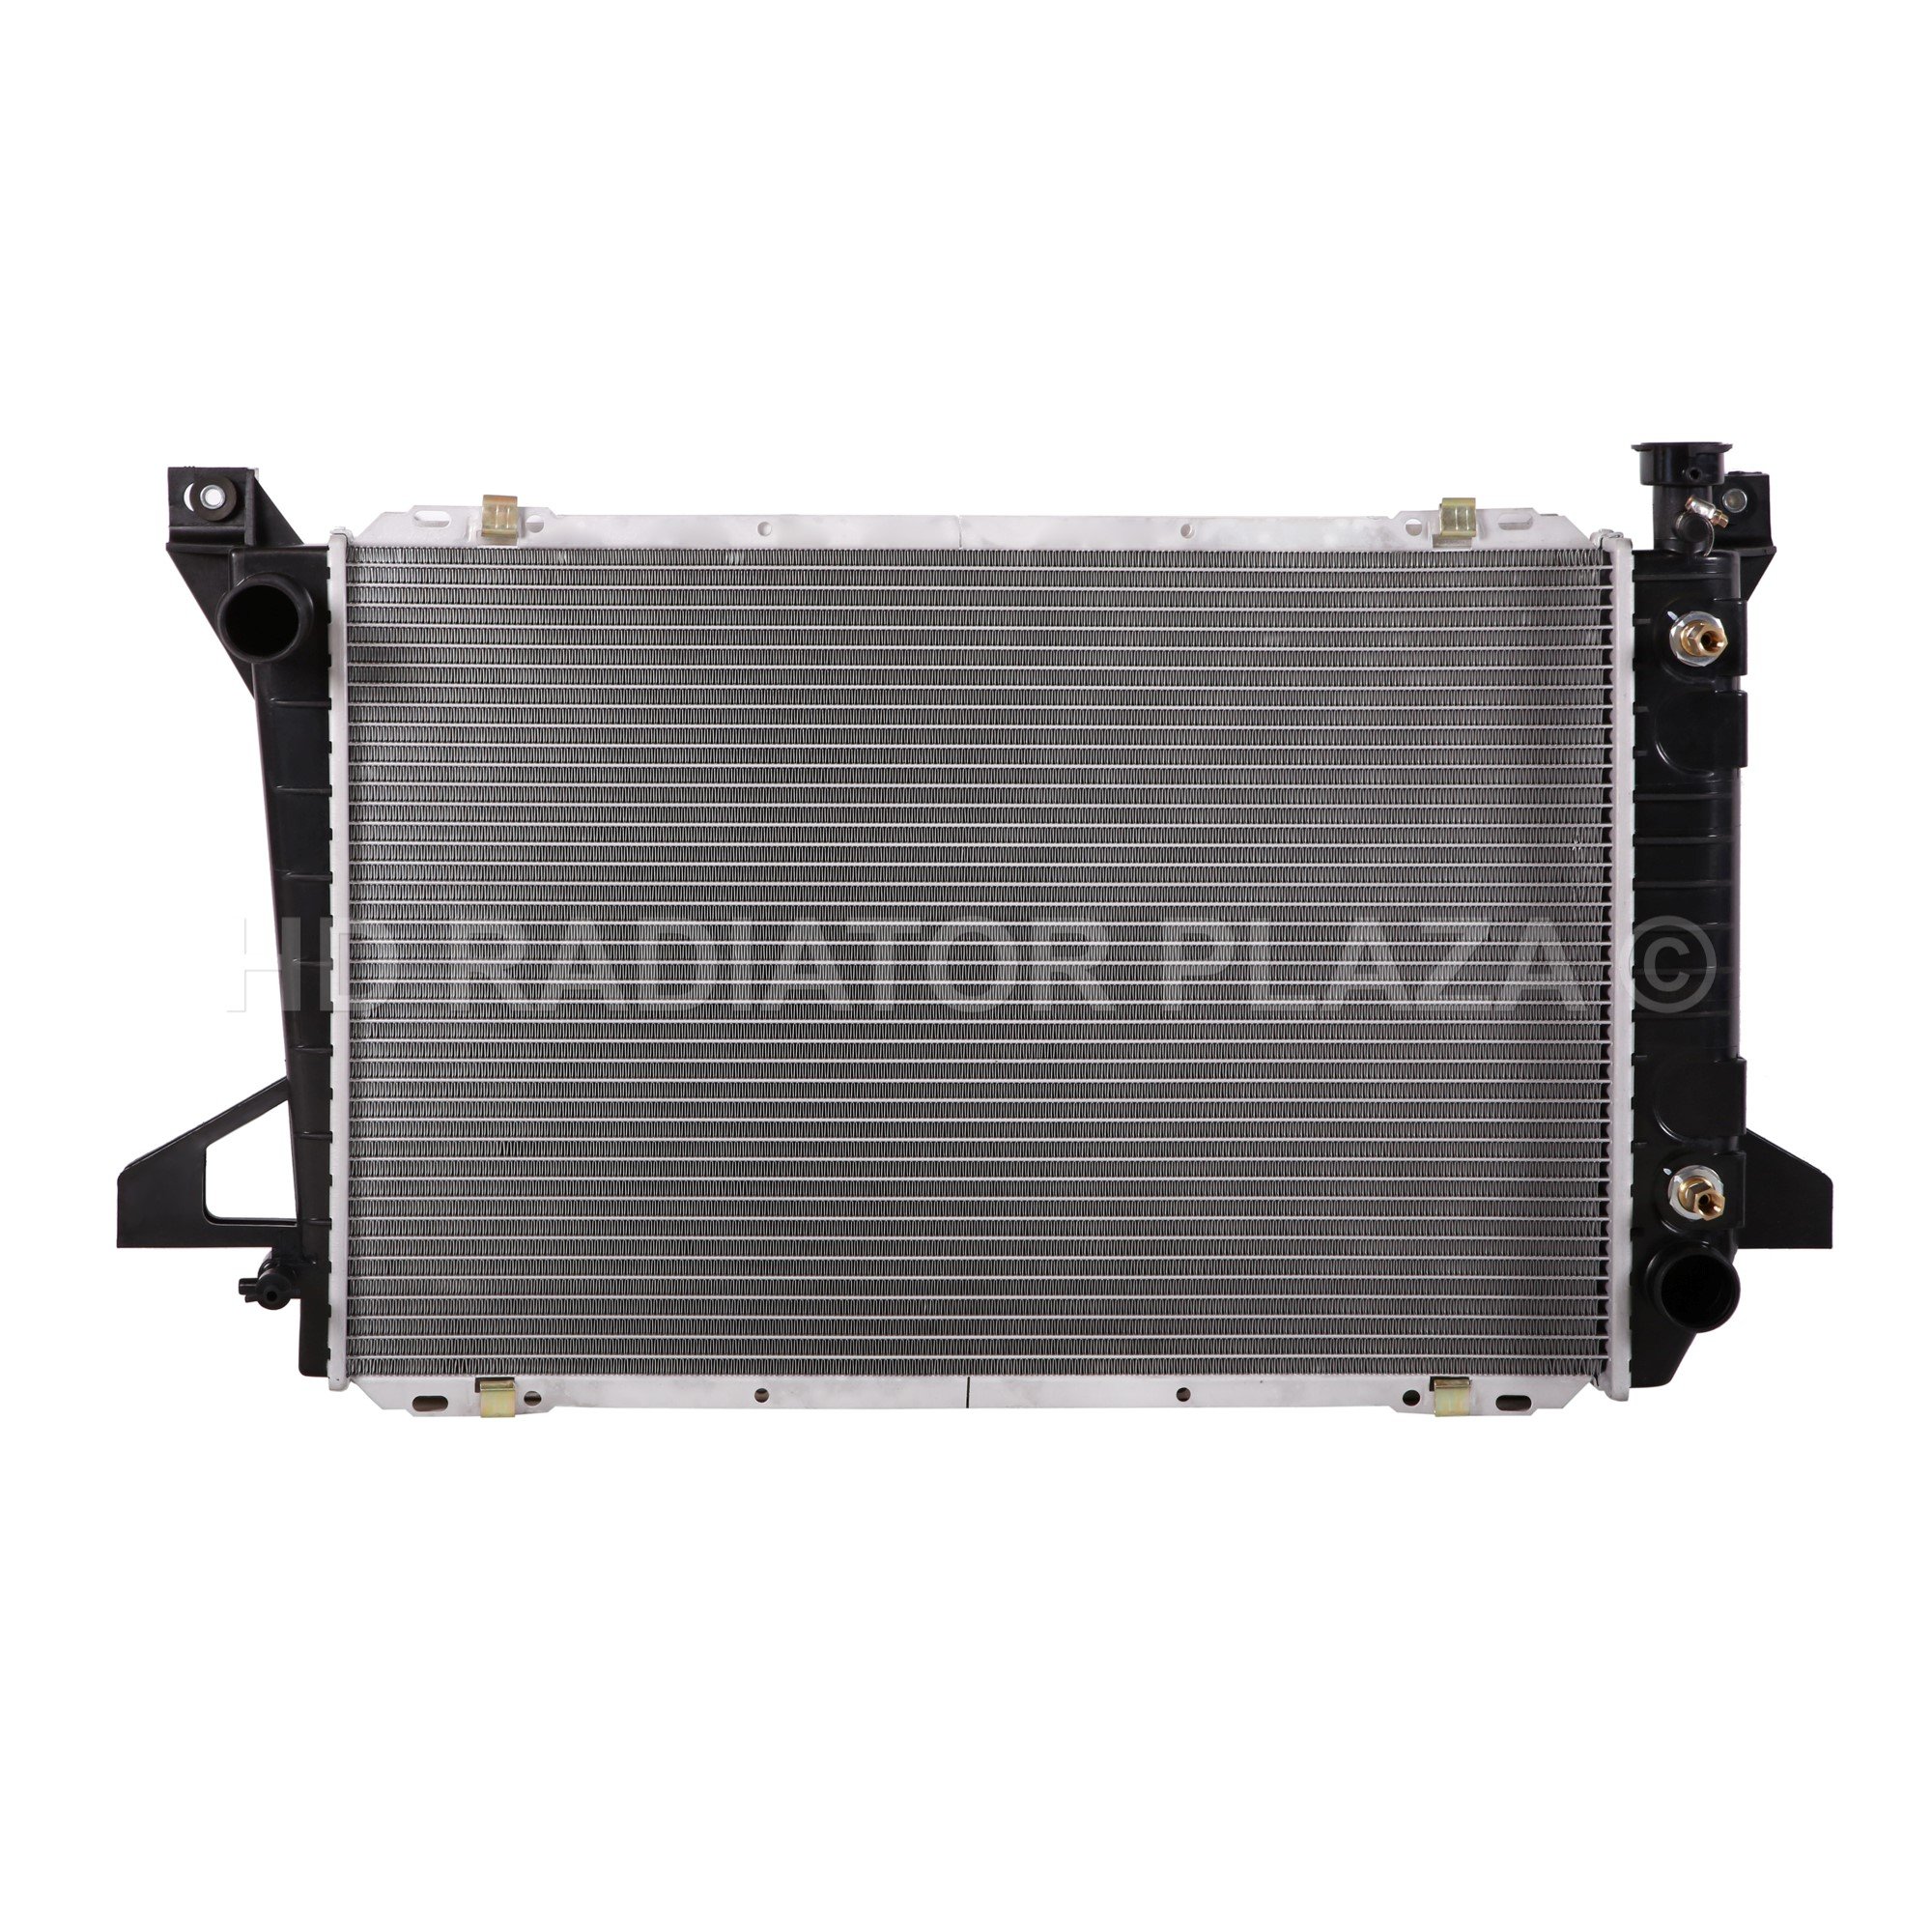 Radiator for 85-96 Ford F-150/F-250/F-350/Bronco